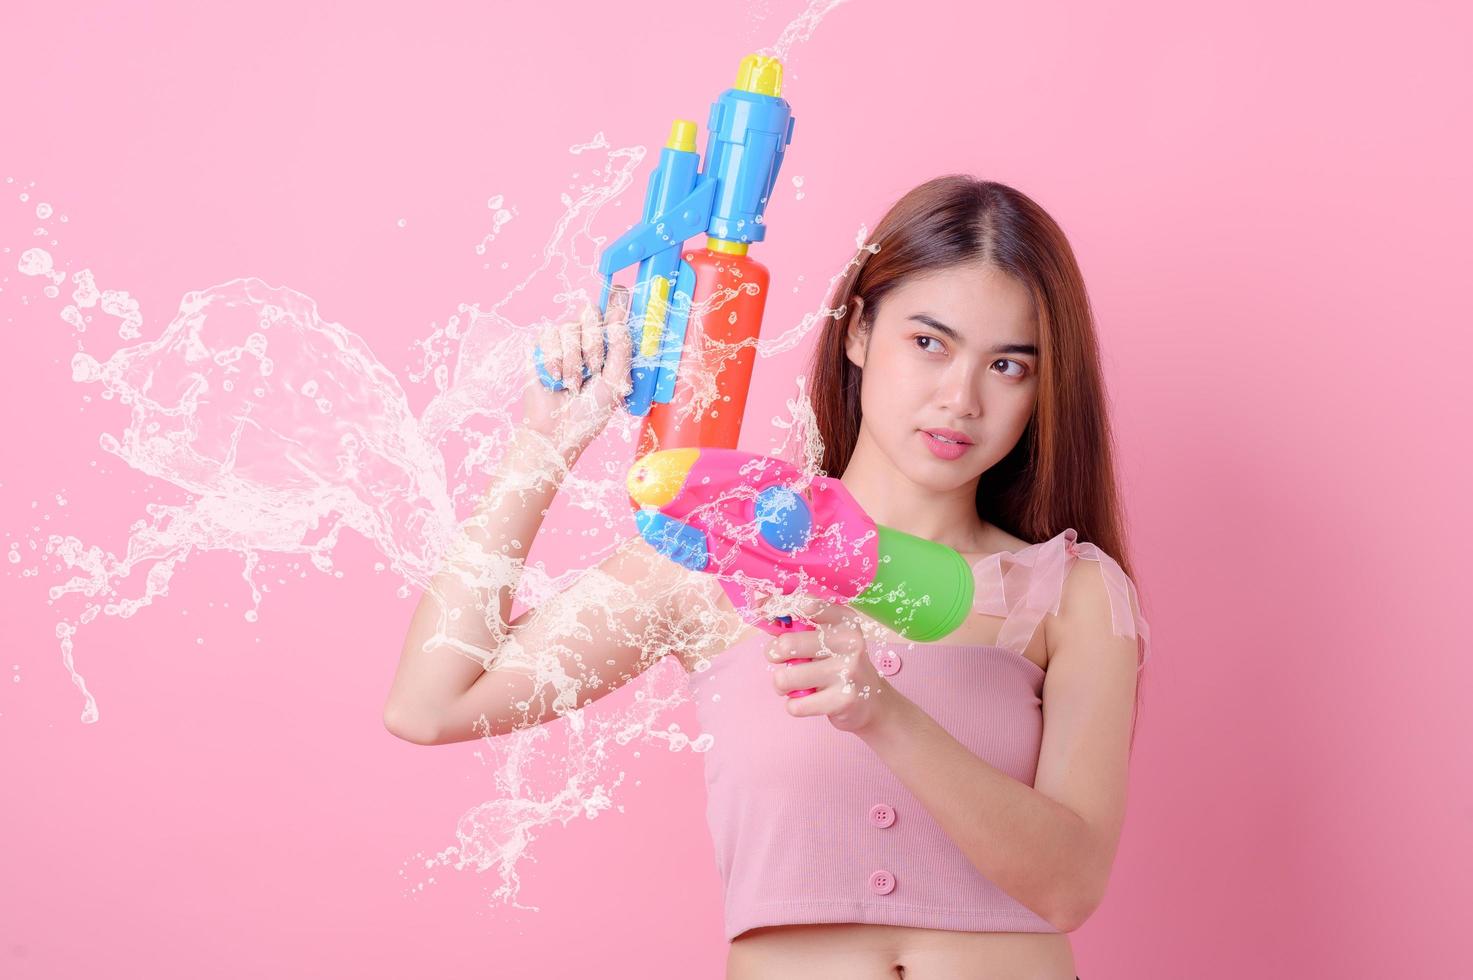 A beautiful Asian woman shows a gesture while holding a plastic water gun during the Songkran festival photo